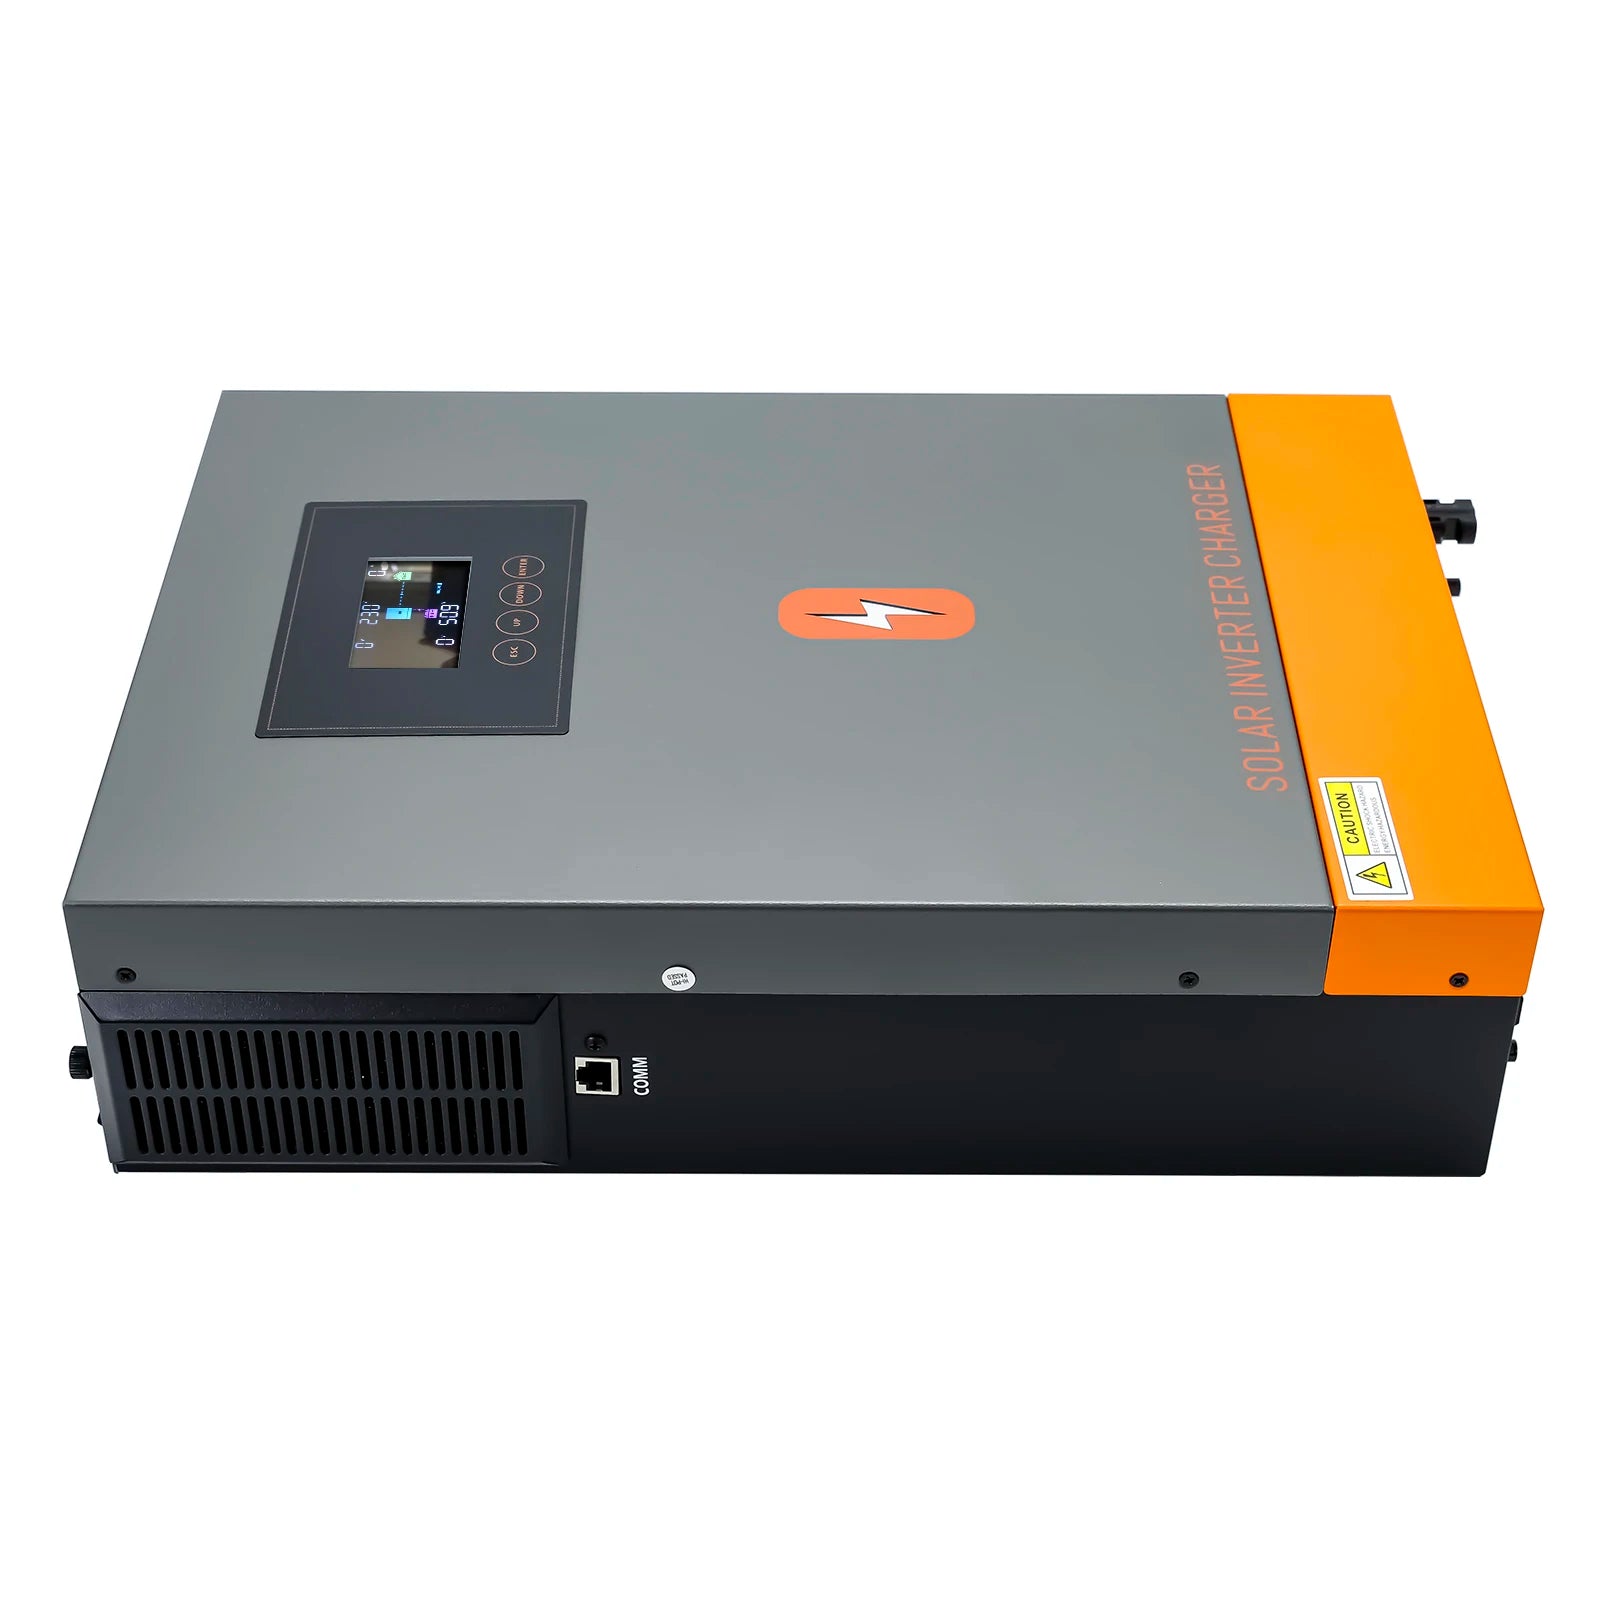 PowMr 6200W Grid Tied Inverter, Hybrid solar inverter with customizable specifications for various applications.